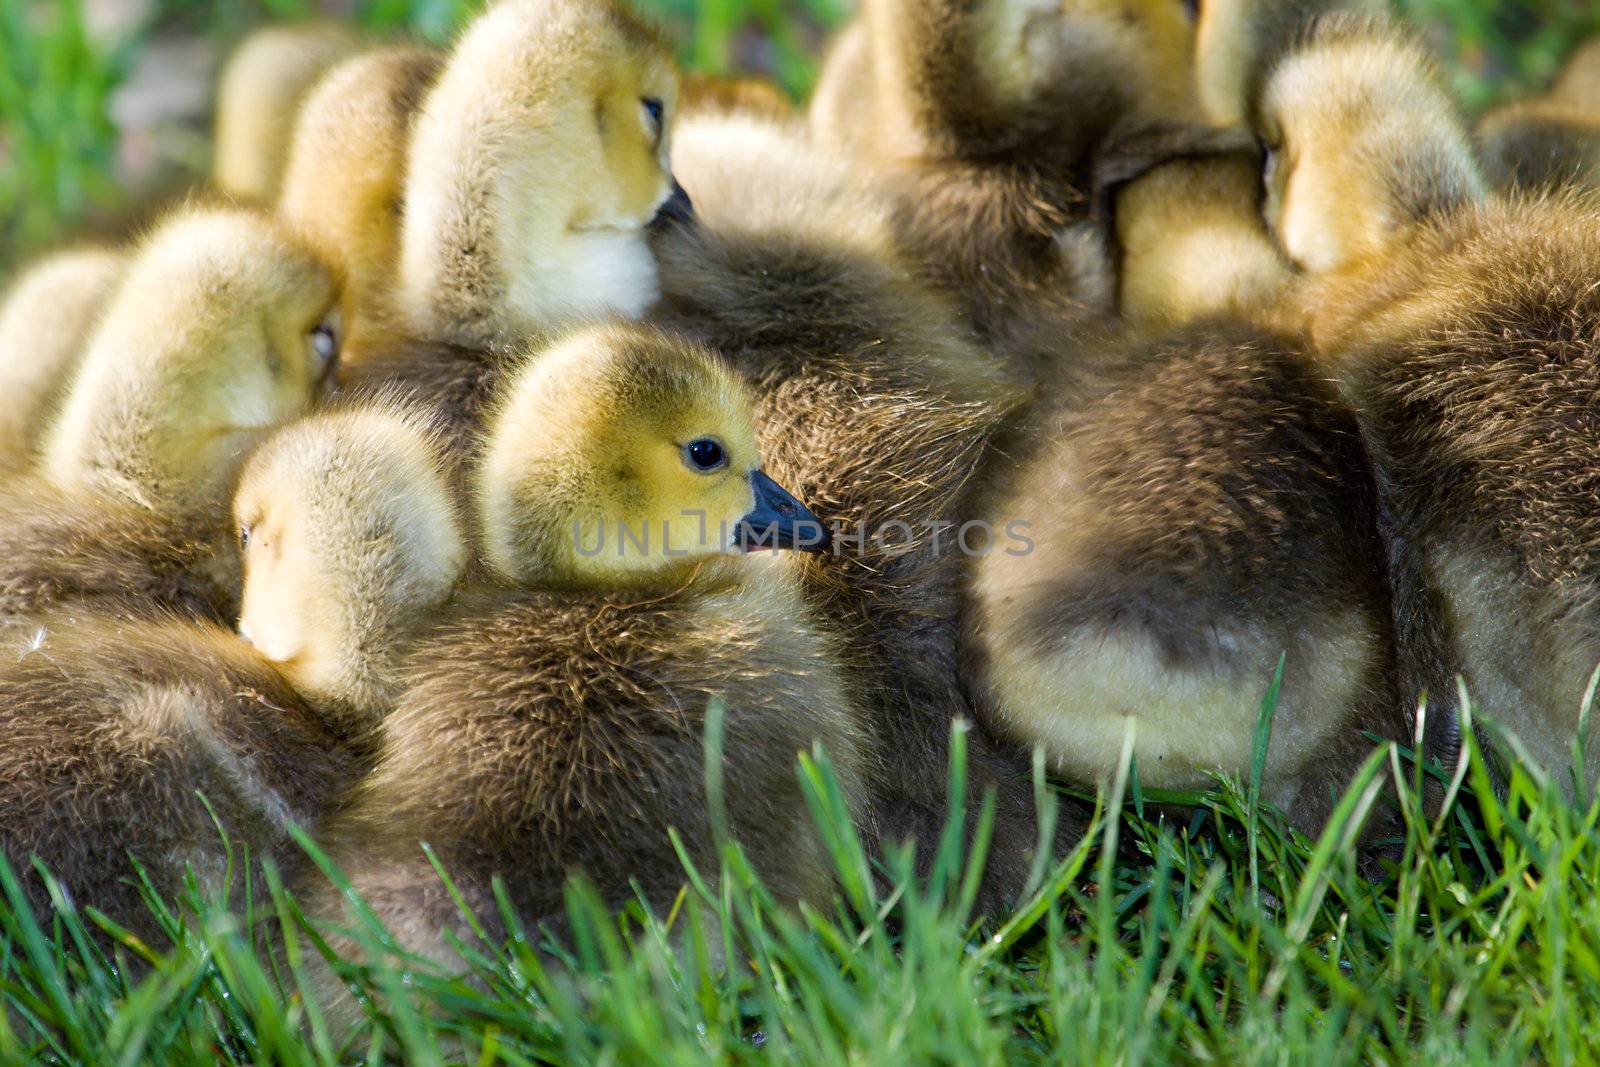 A group of Canadian goslings